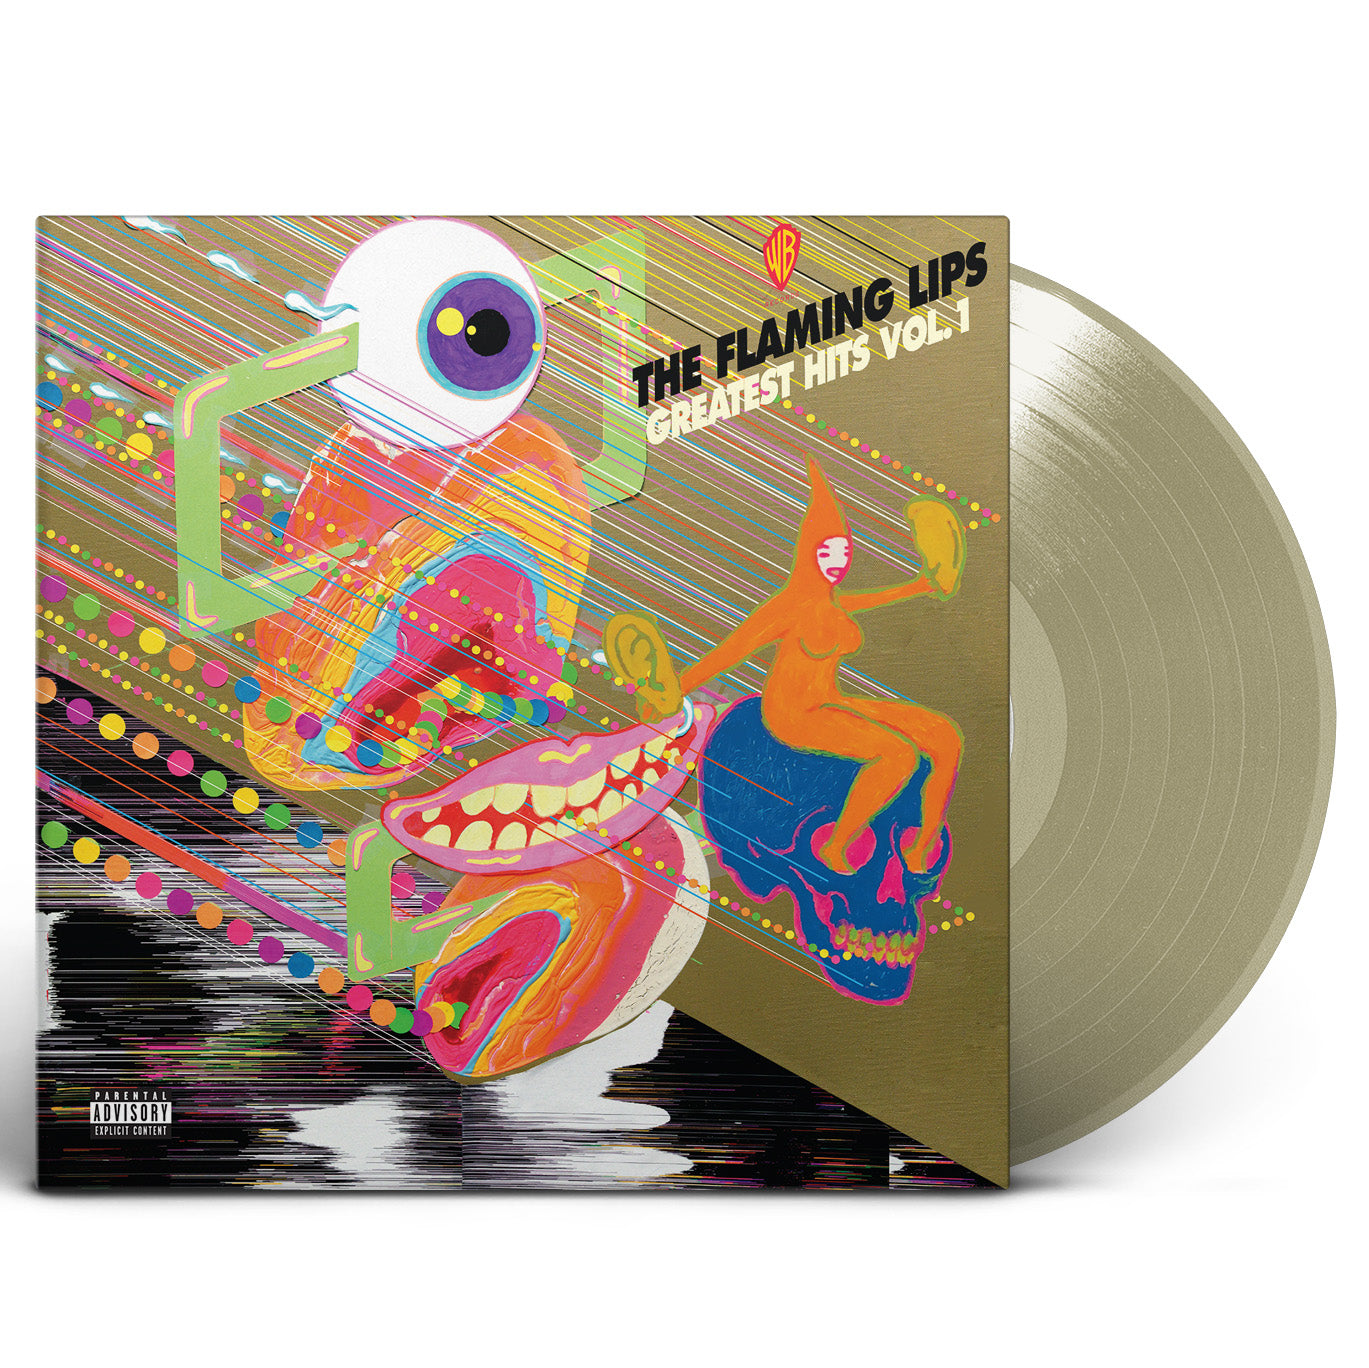 The Flaming Lips - Greatest Hits, Vol. 1: Limited Gold Colour Vinyl LP